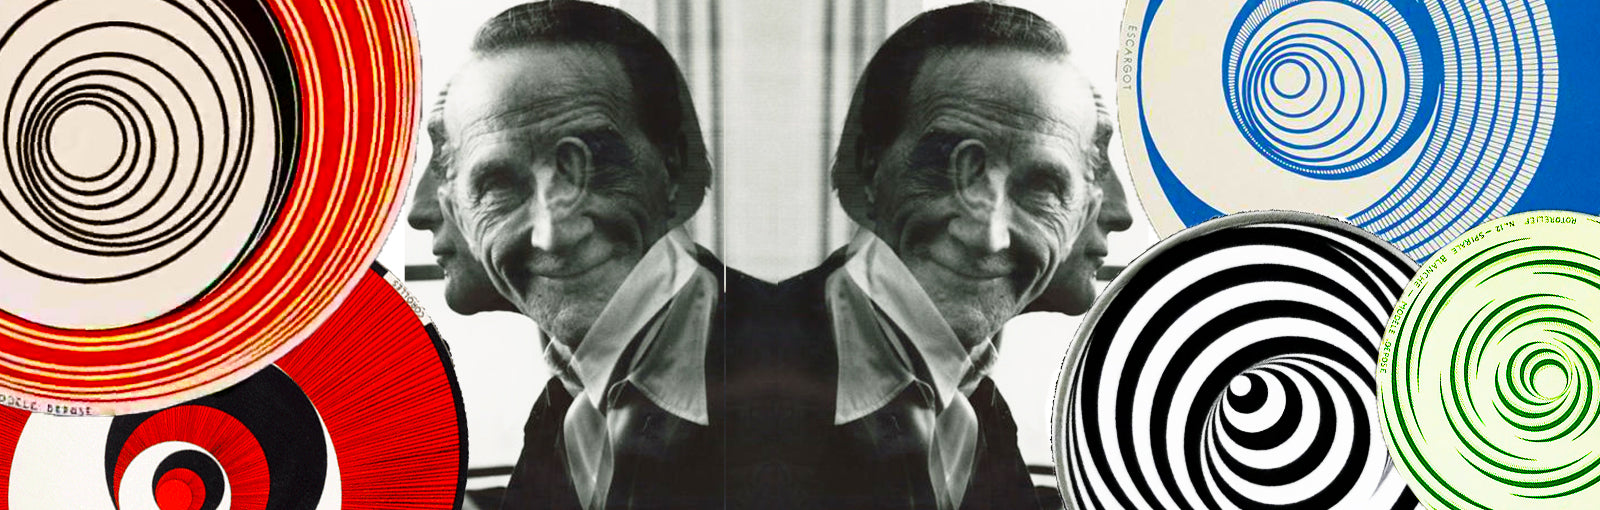 DUCHAMP: THE END OF ART HISTORY?